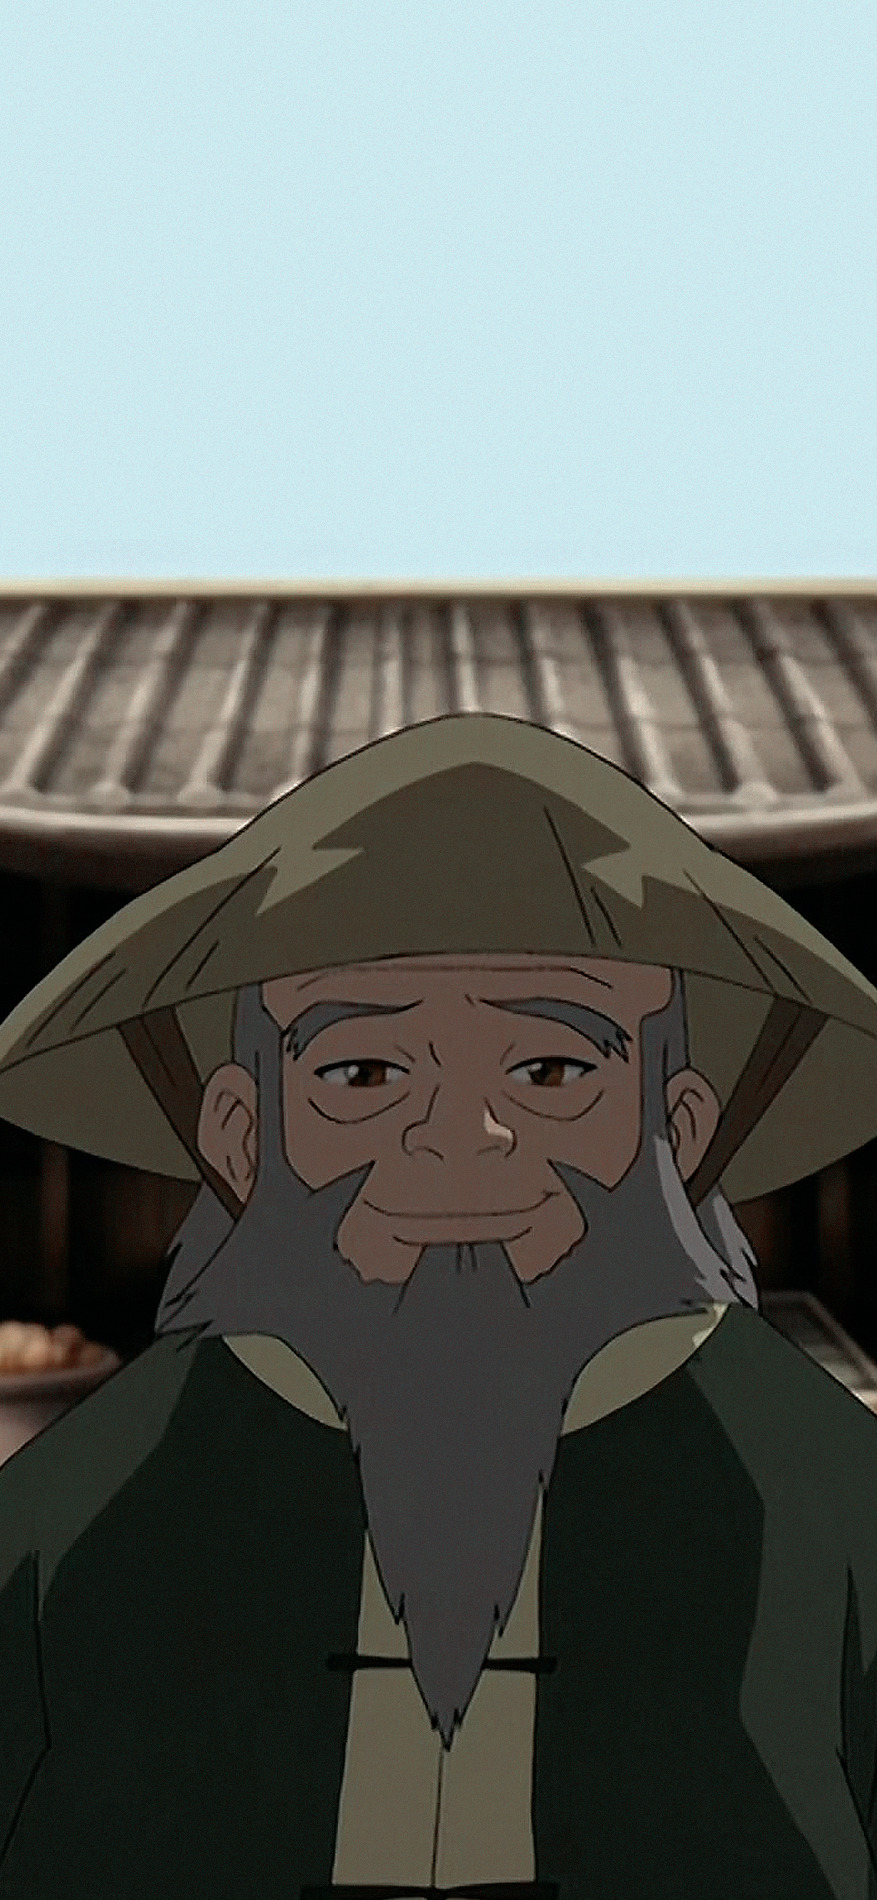 uncle iroh wallpaper  Avatar the last airbender Iroh Iroh wallpaper  avatar